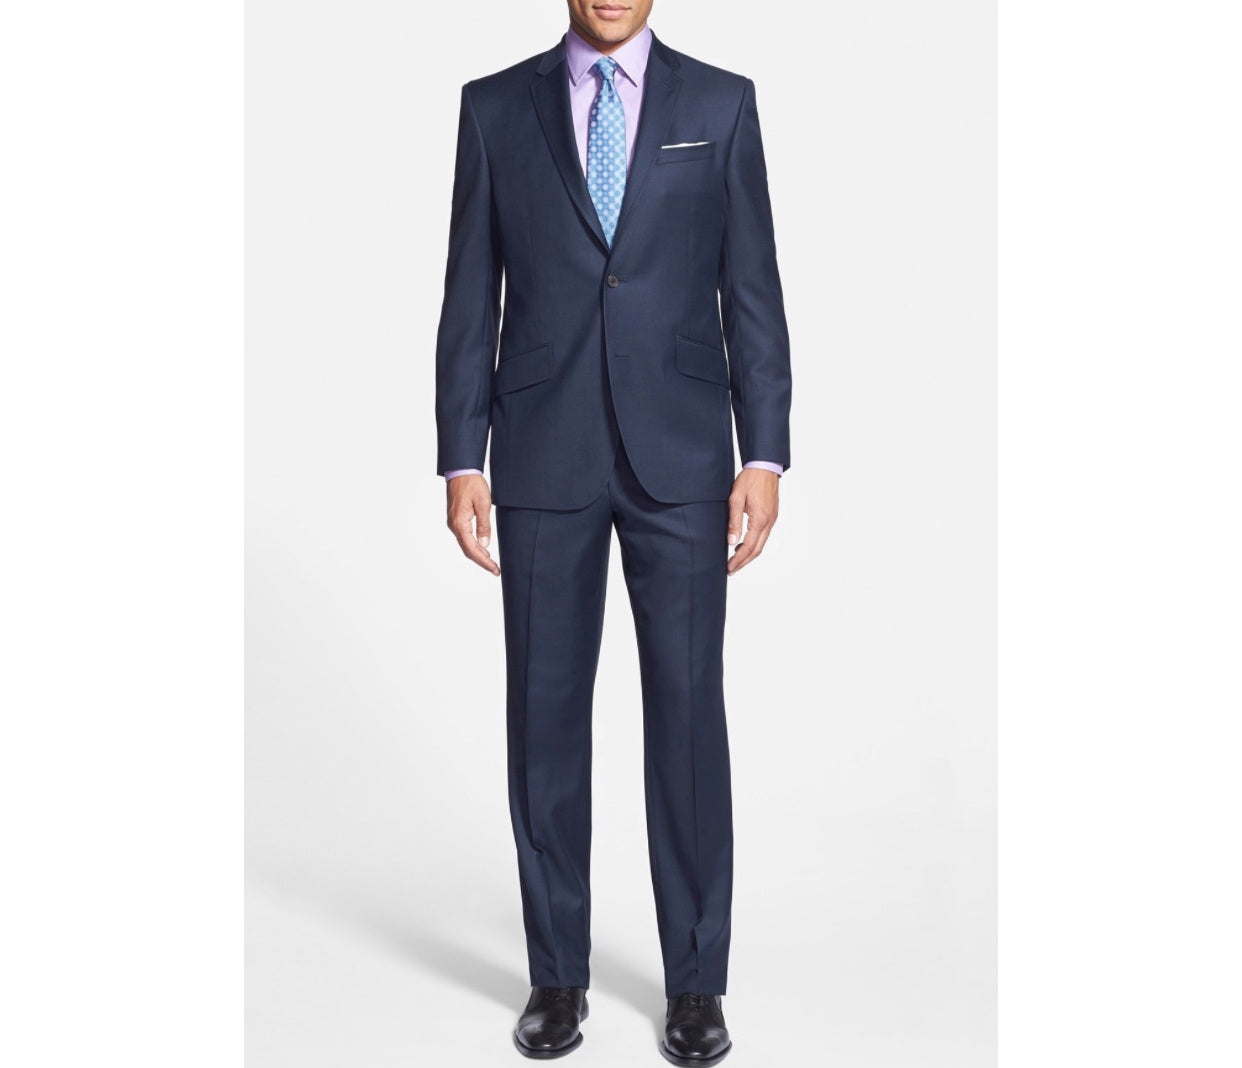 Ted Baker Jones Suit in Navy – Raggs - Fashion for Men and Women